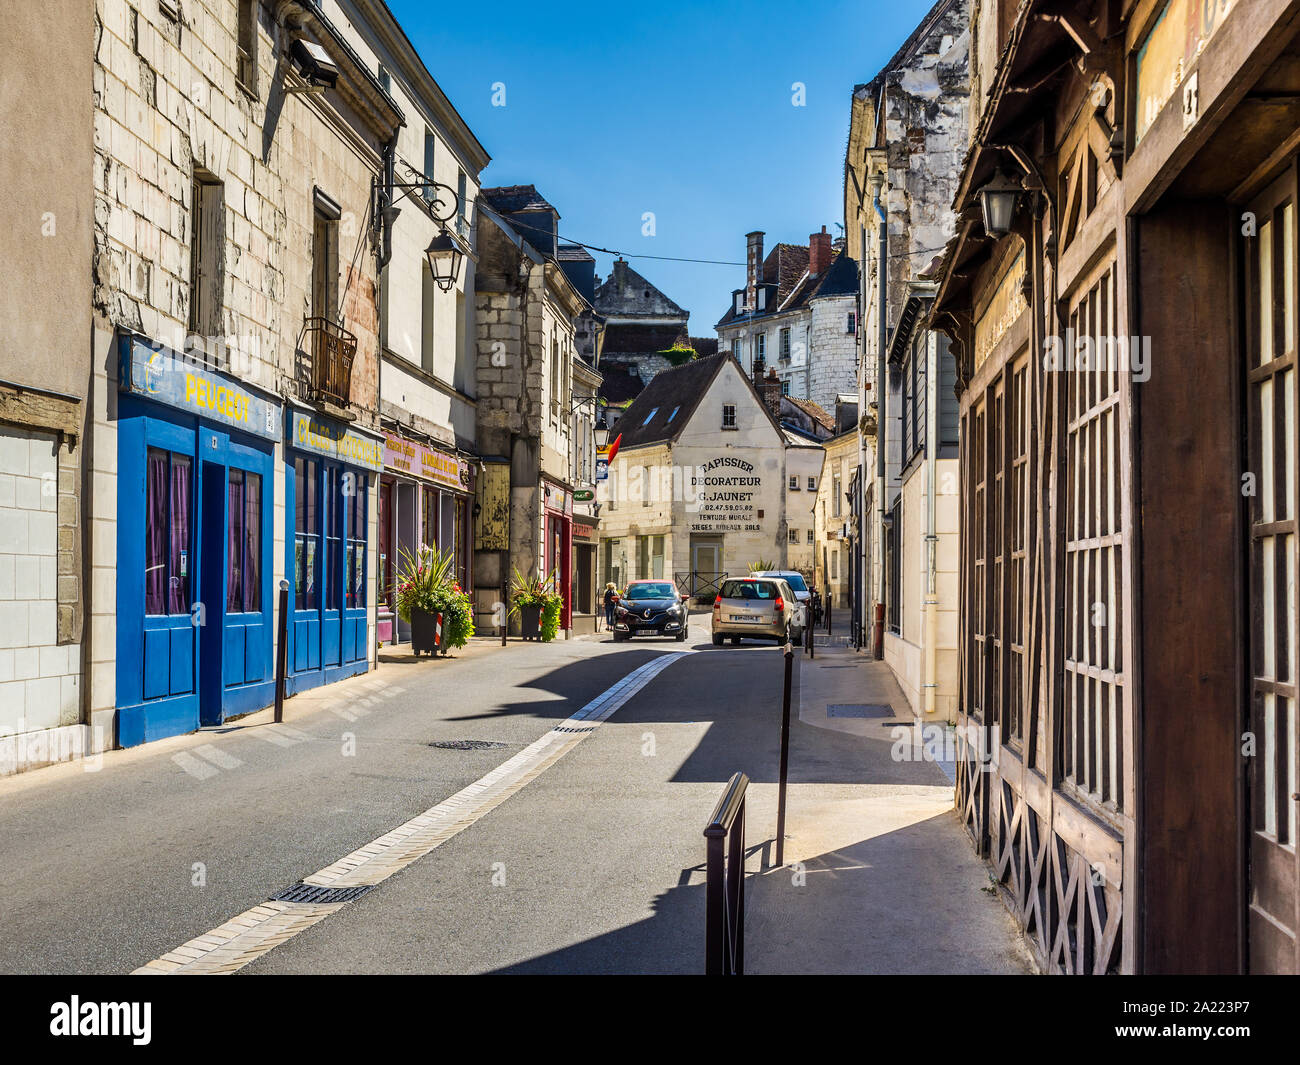 Businesses and shops on the Rue des Moulins, Loches, Indre-et-Loire, France. Stock Photo